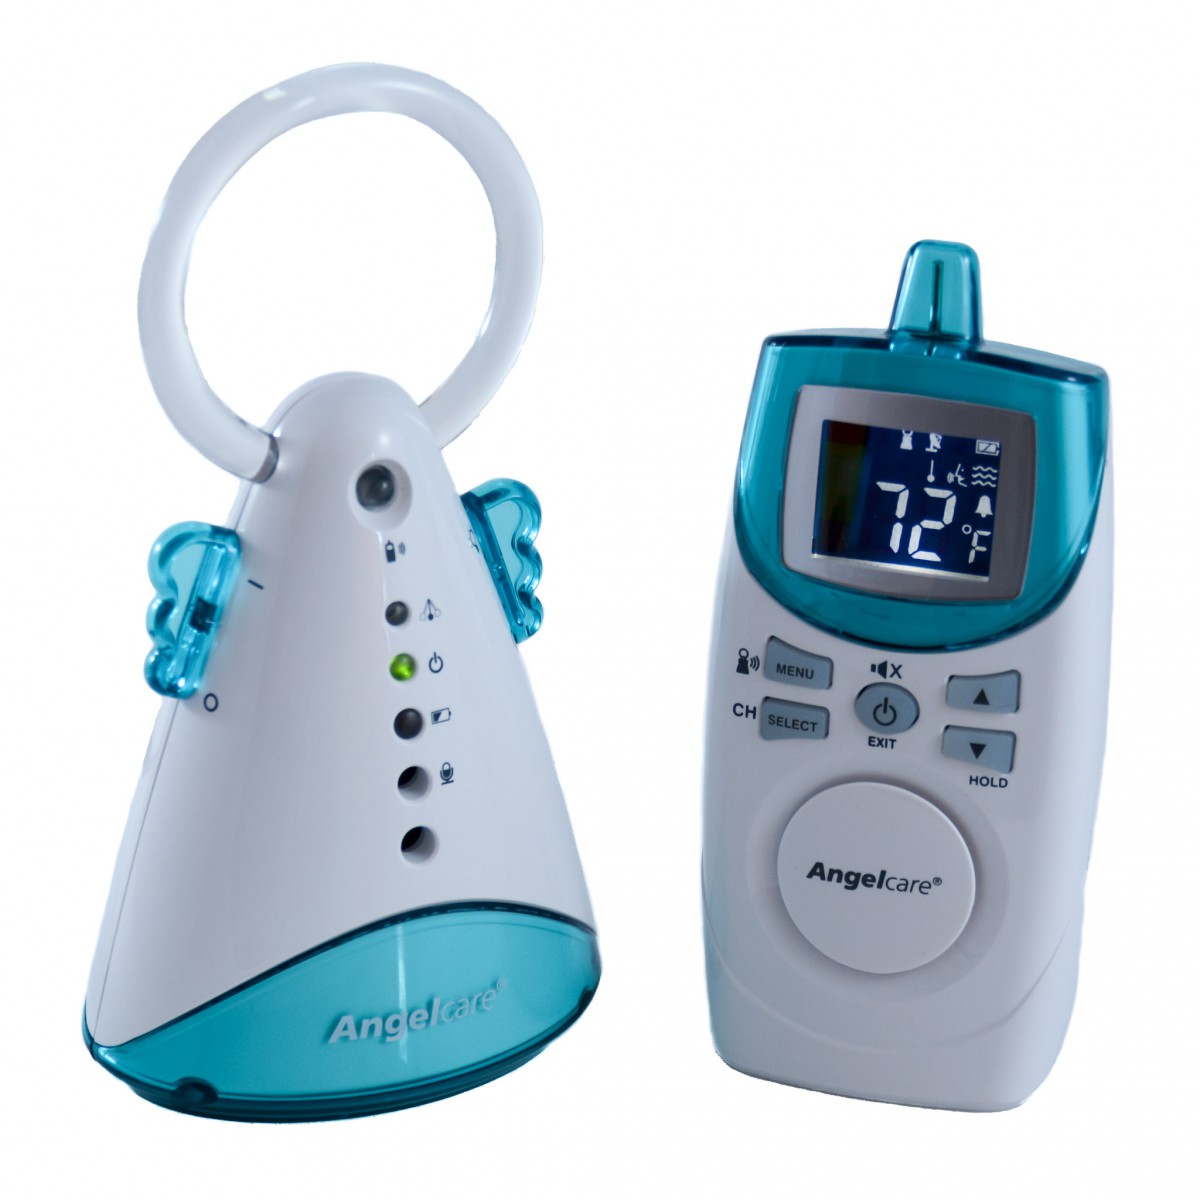 Angel care baby monitor (sound only with mattress sensor)